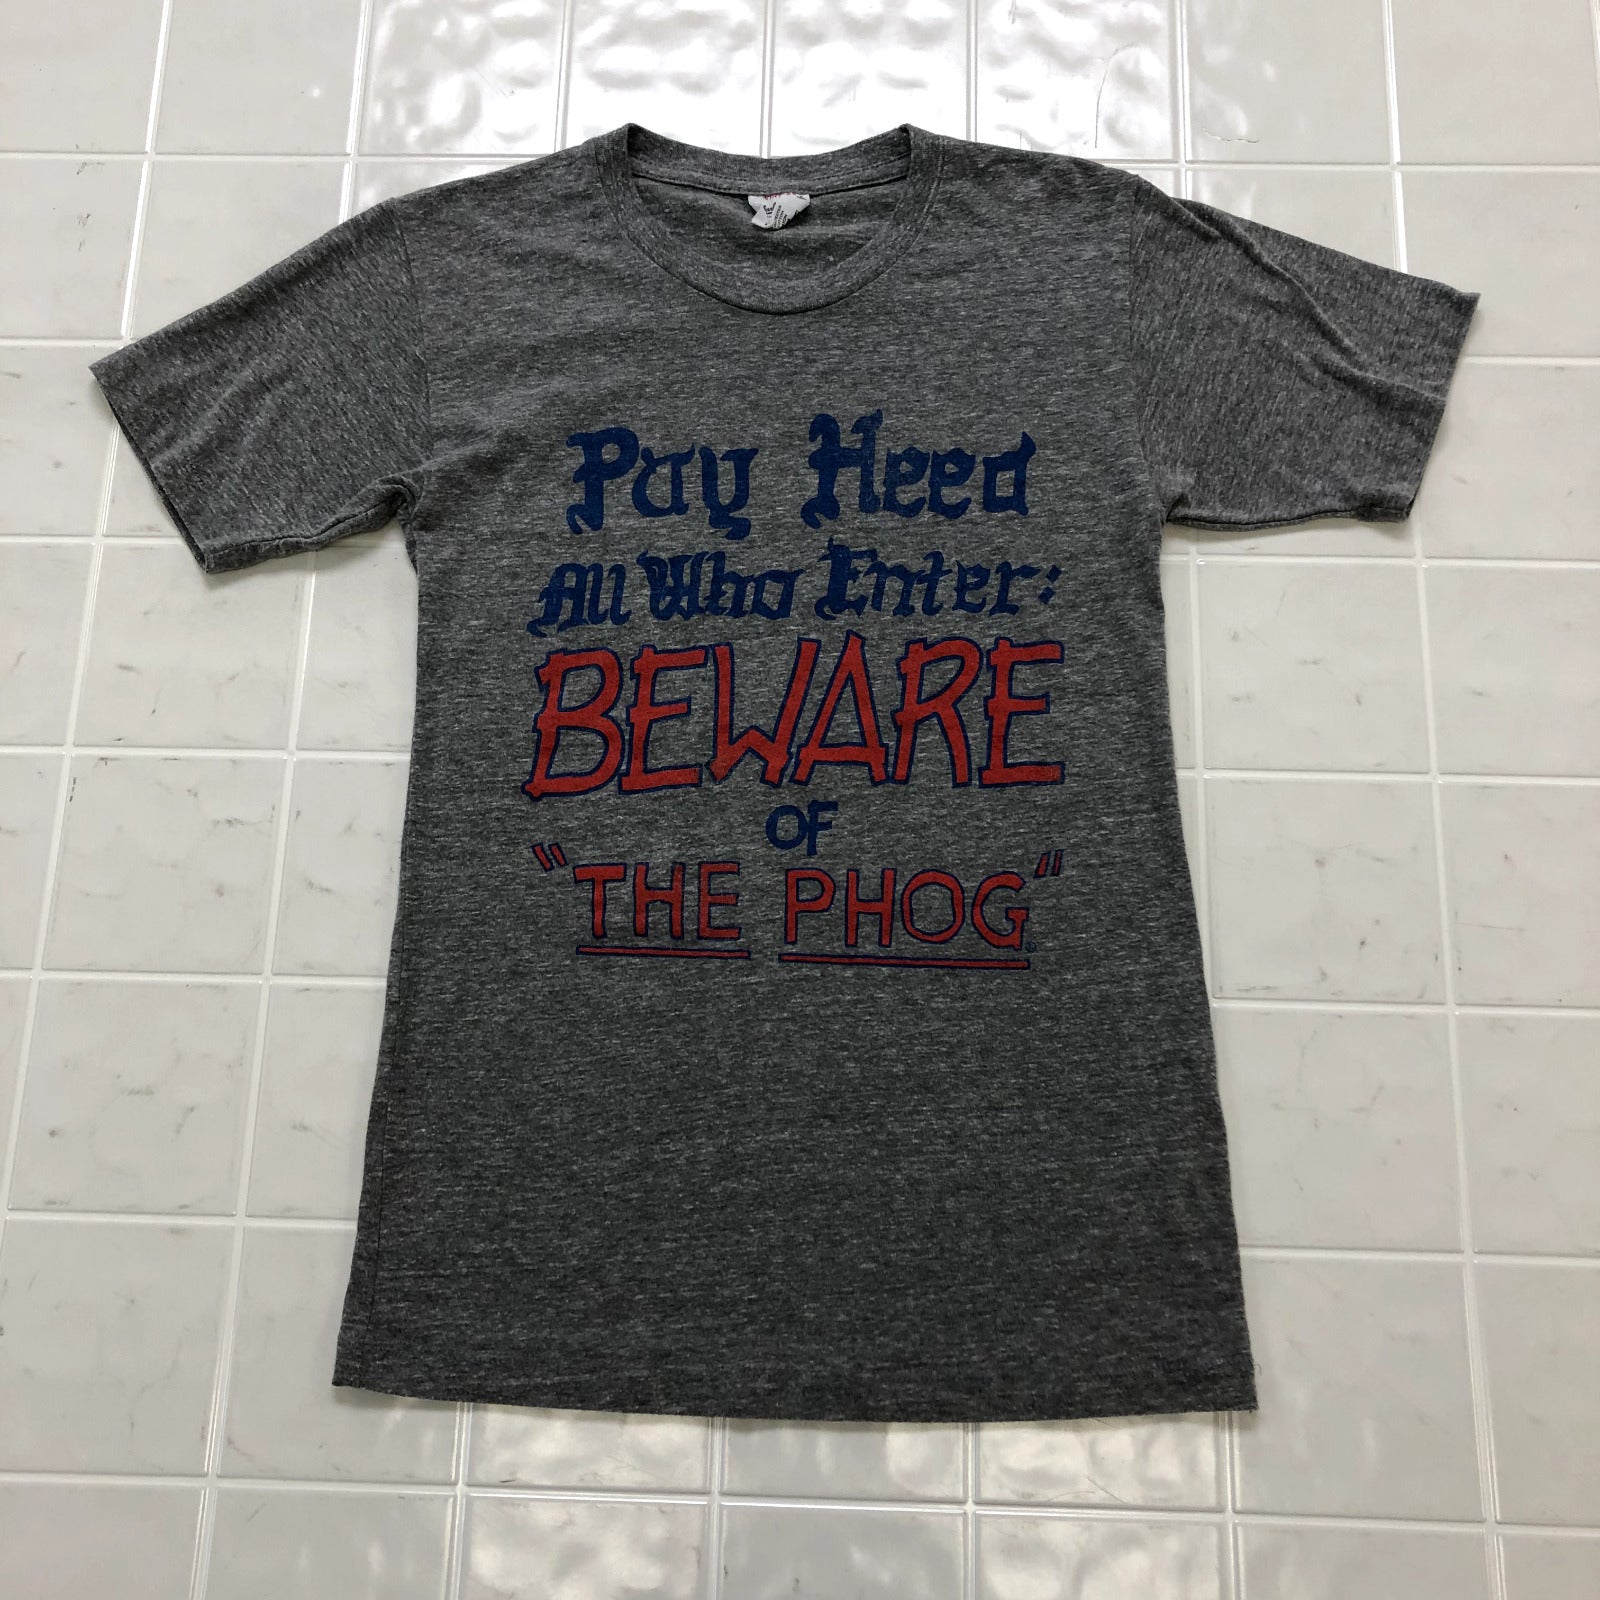 Charlie Hustle Gray All Who Enter Beware Of "The Phog" T-shirt Adult Size XS